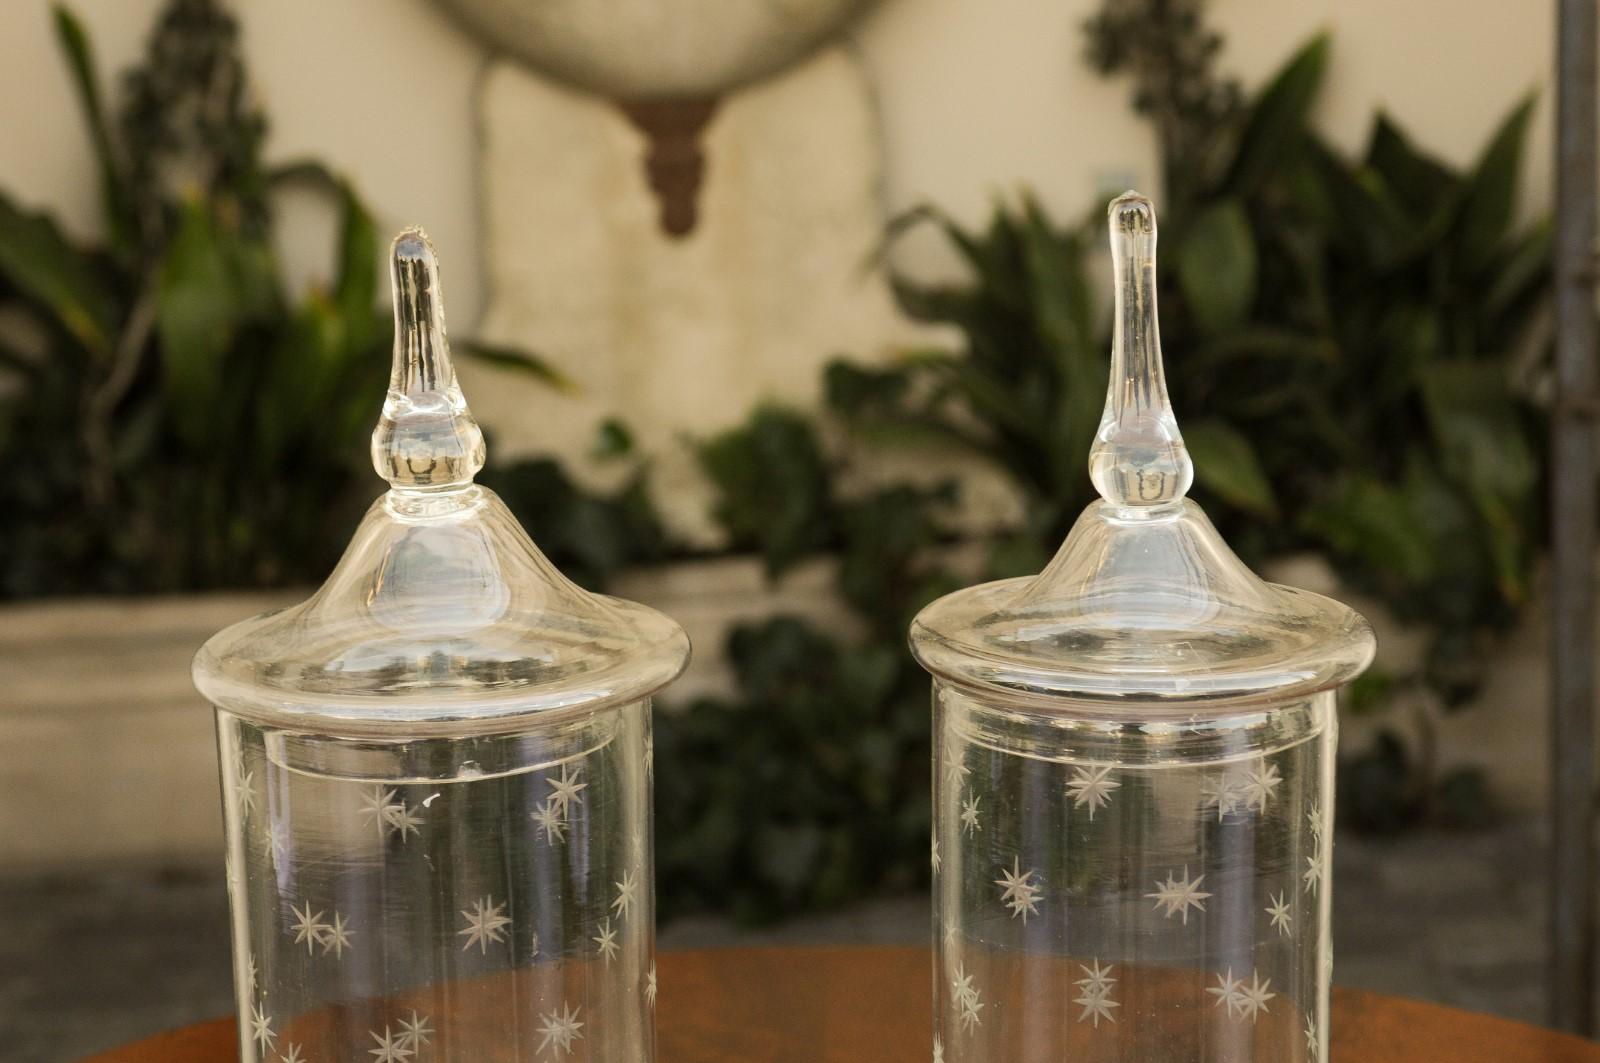 20th Century Pair of English 1900s Edwardian Period Tall Lidded Jars with Petite Star Motifs For Sale